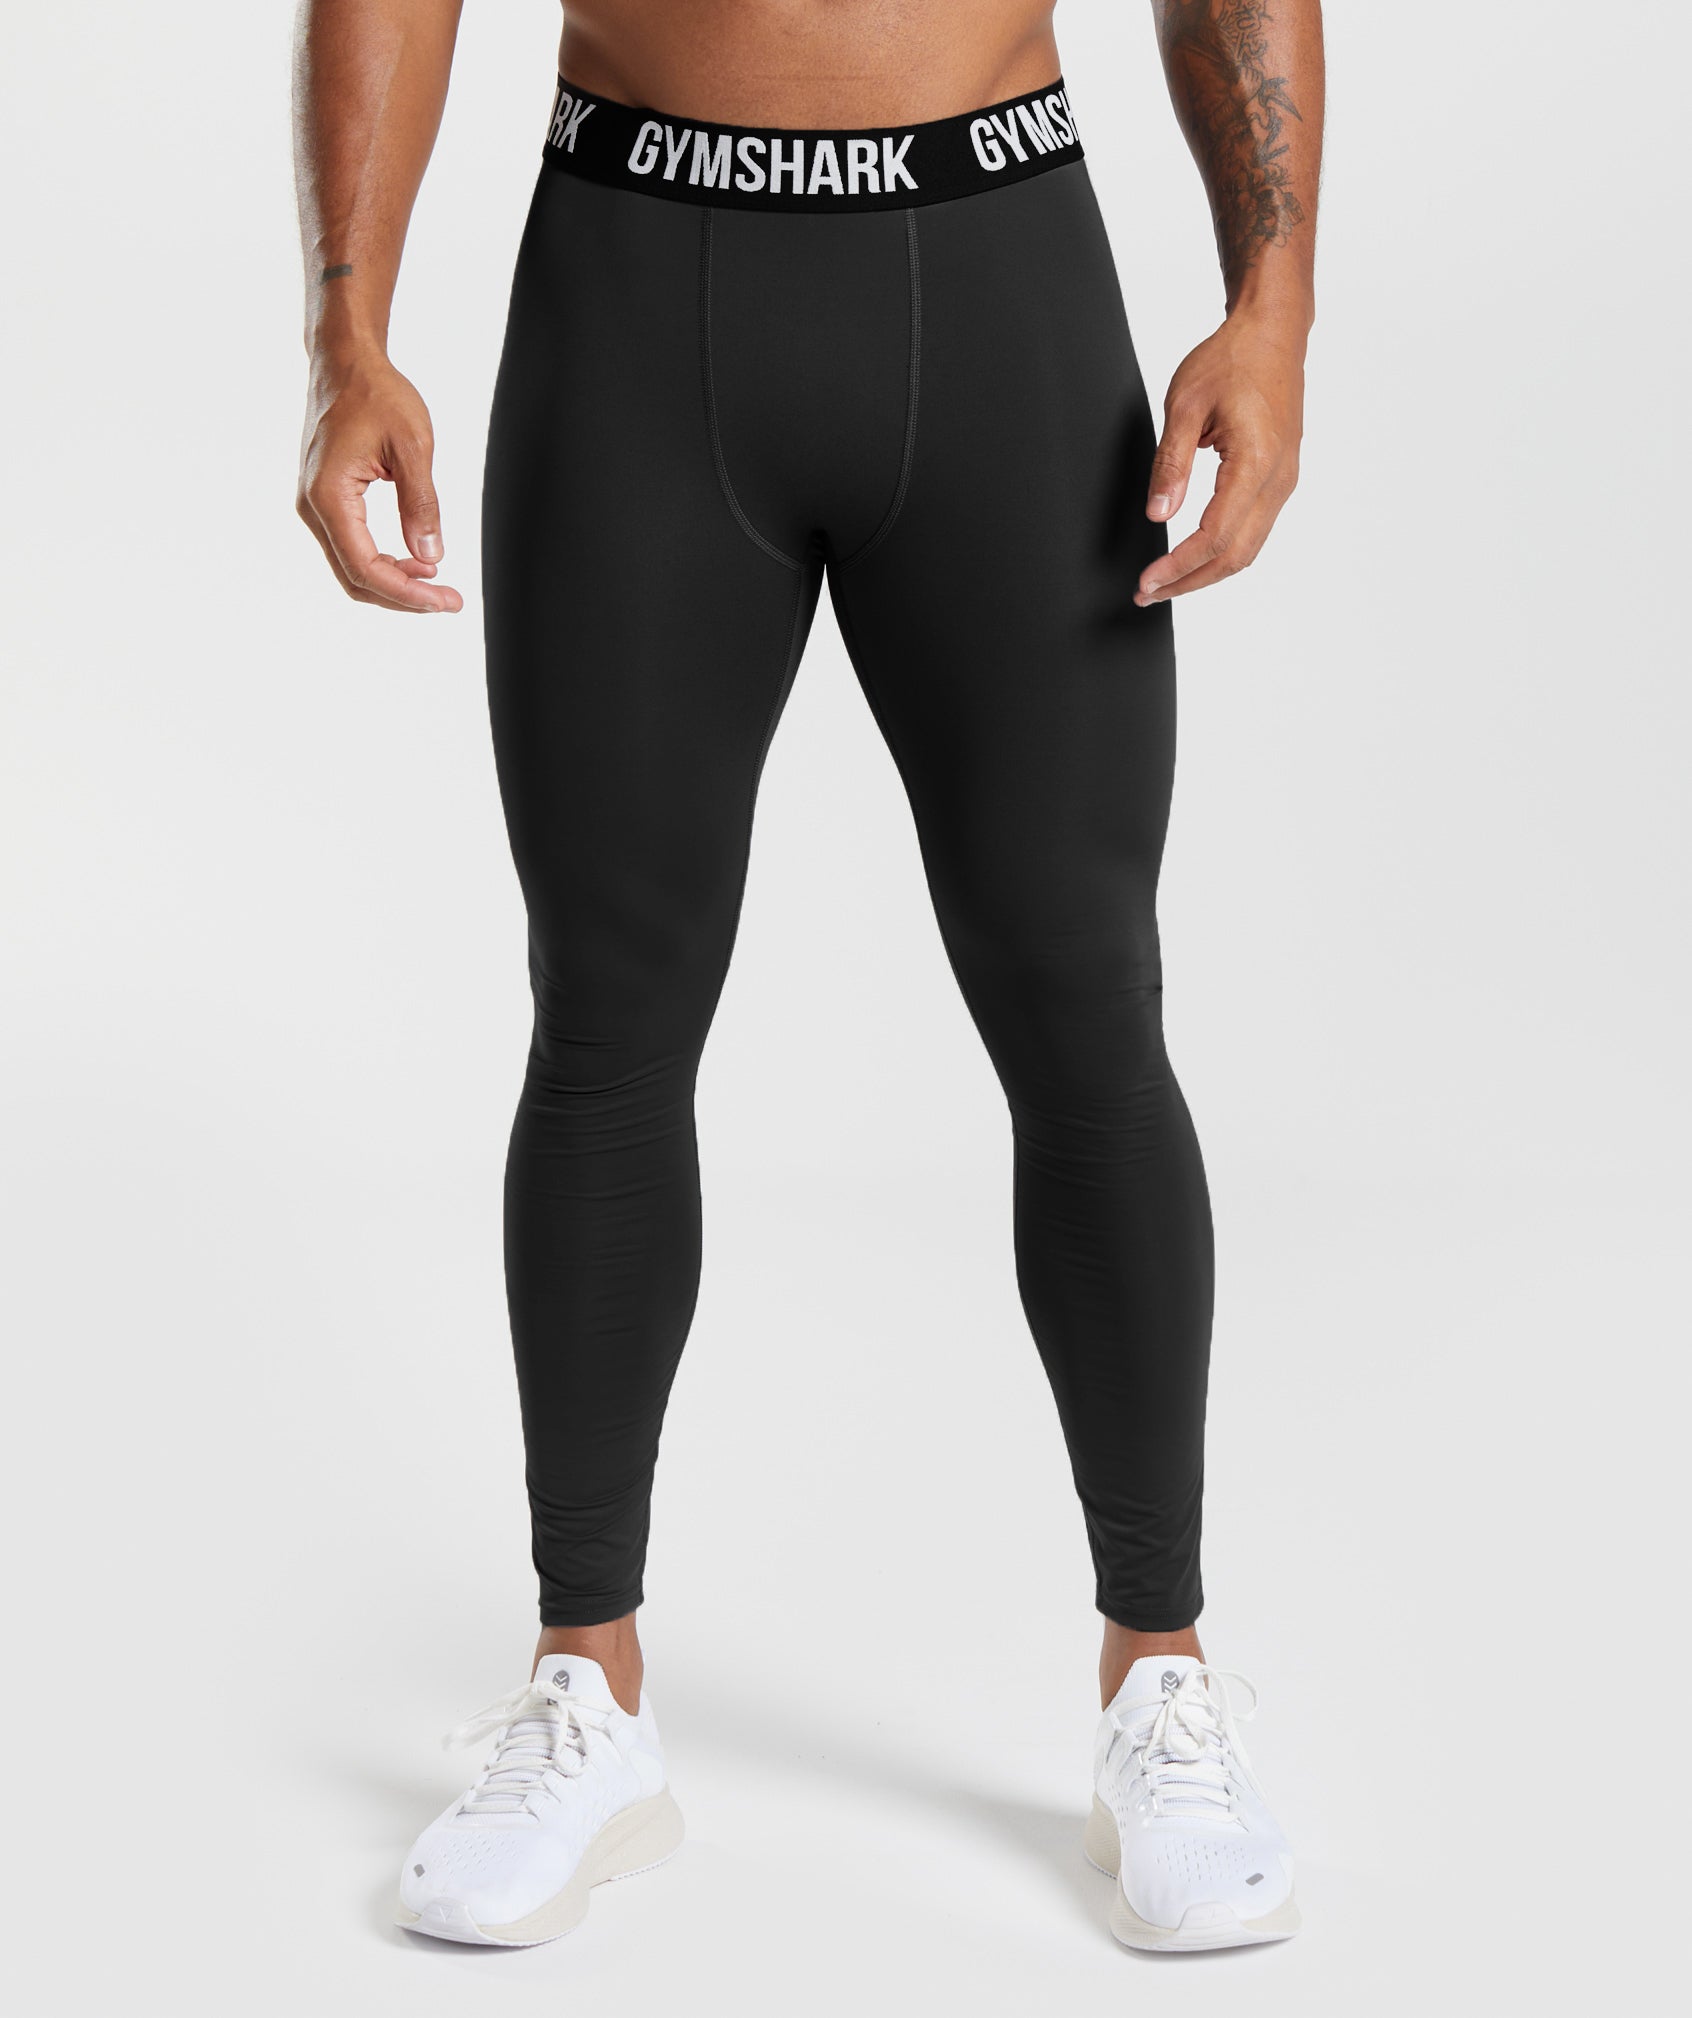 Gymshark Matching Set Gray Size XS - $30 (69% Off Retail) - From